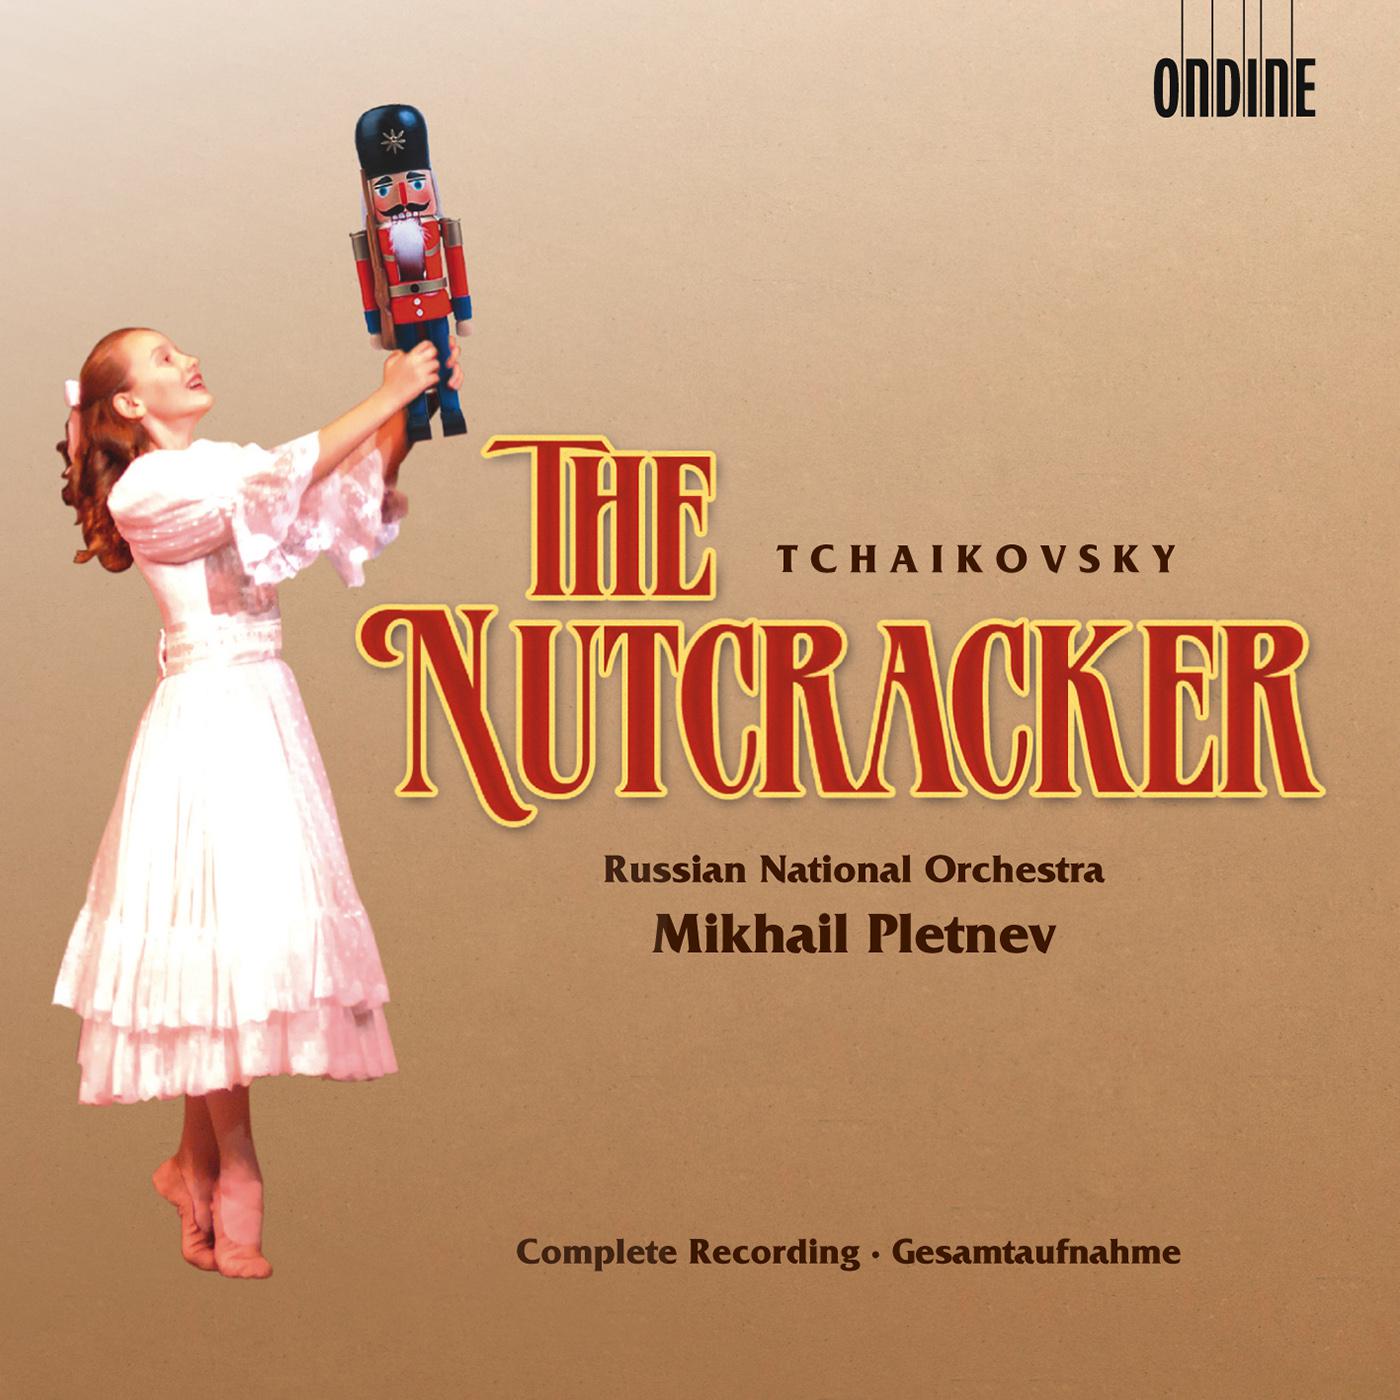 The Nutcracker, Op. 71:Act I Tableau 1: The battle and transformation scene